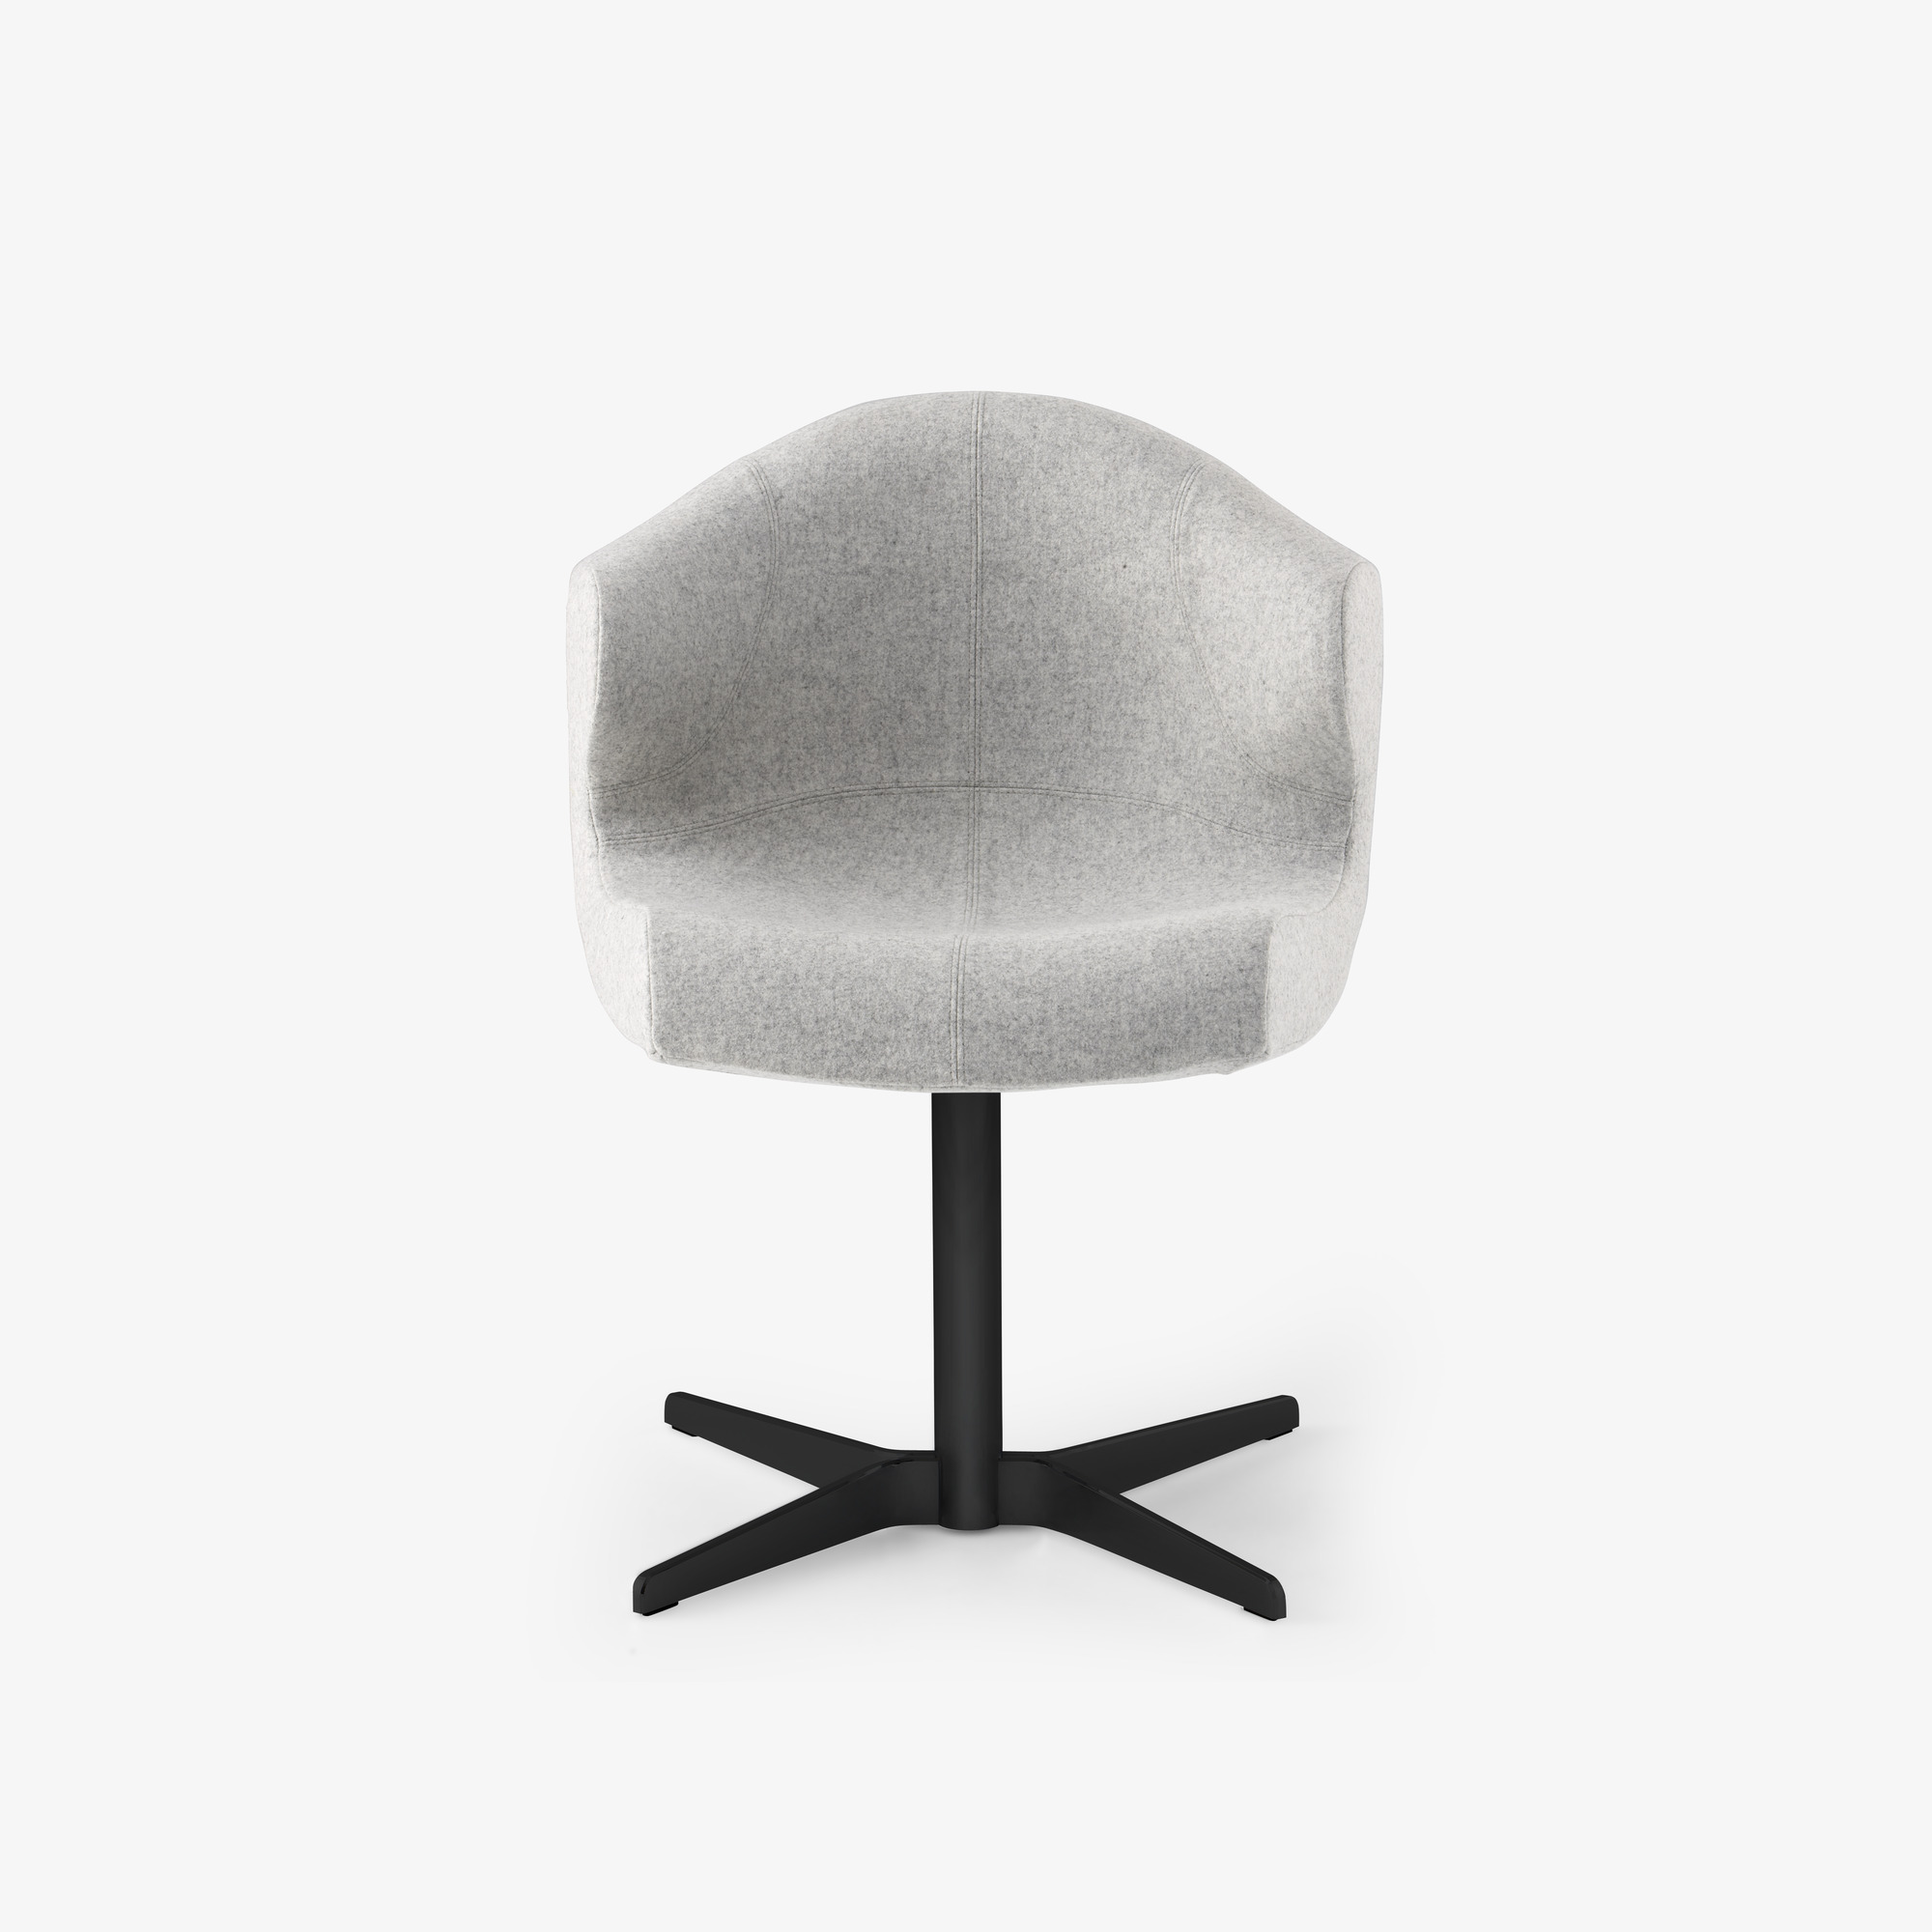 Image Alster chair with arms matt black central pedestal 1